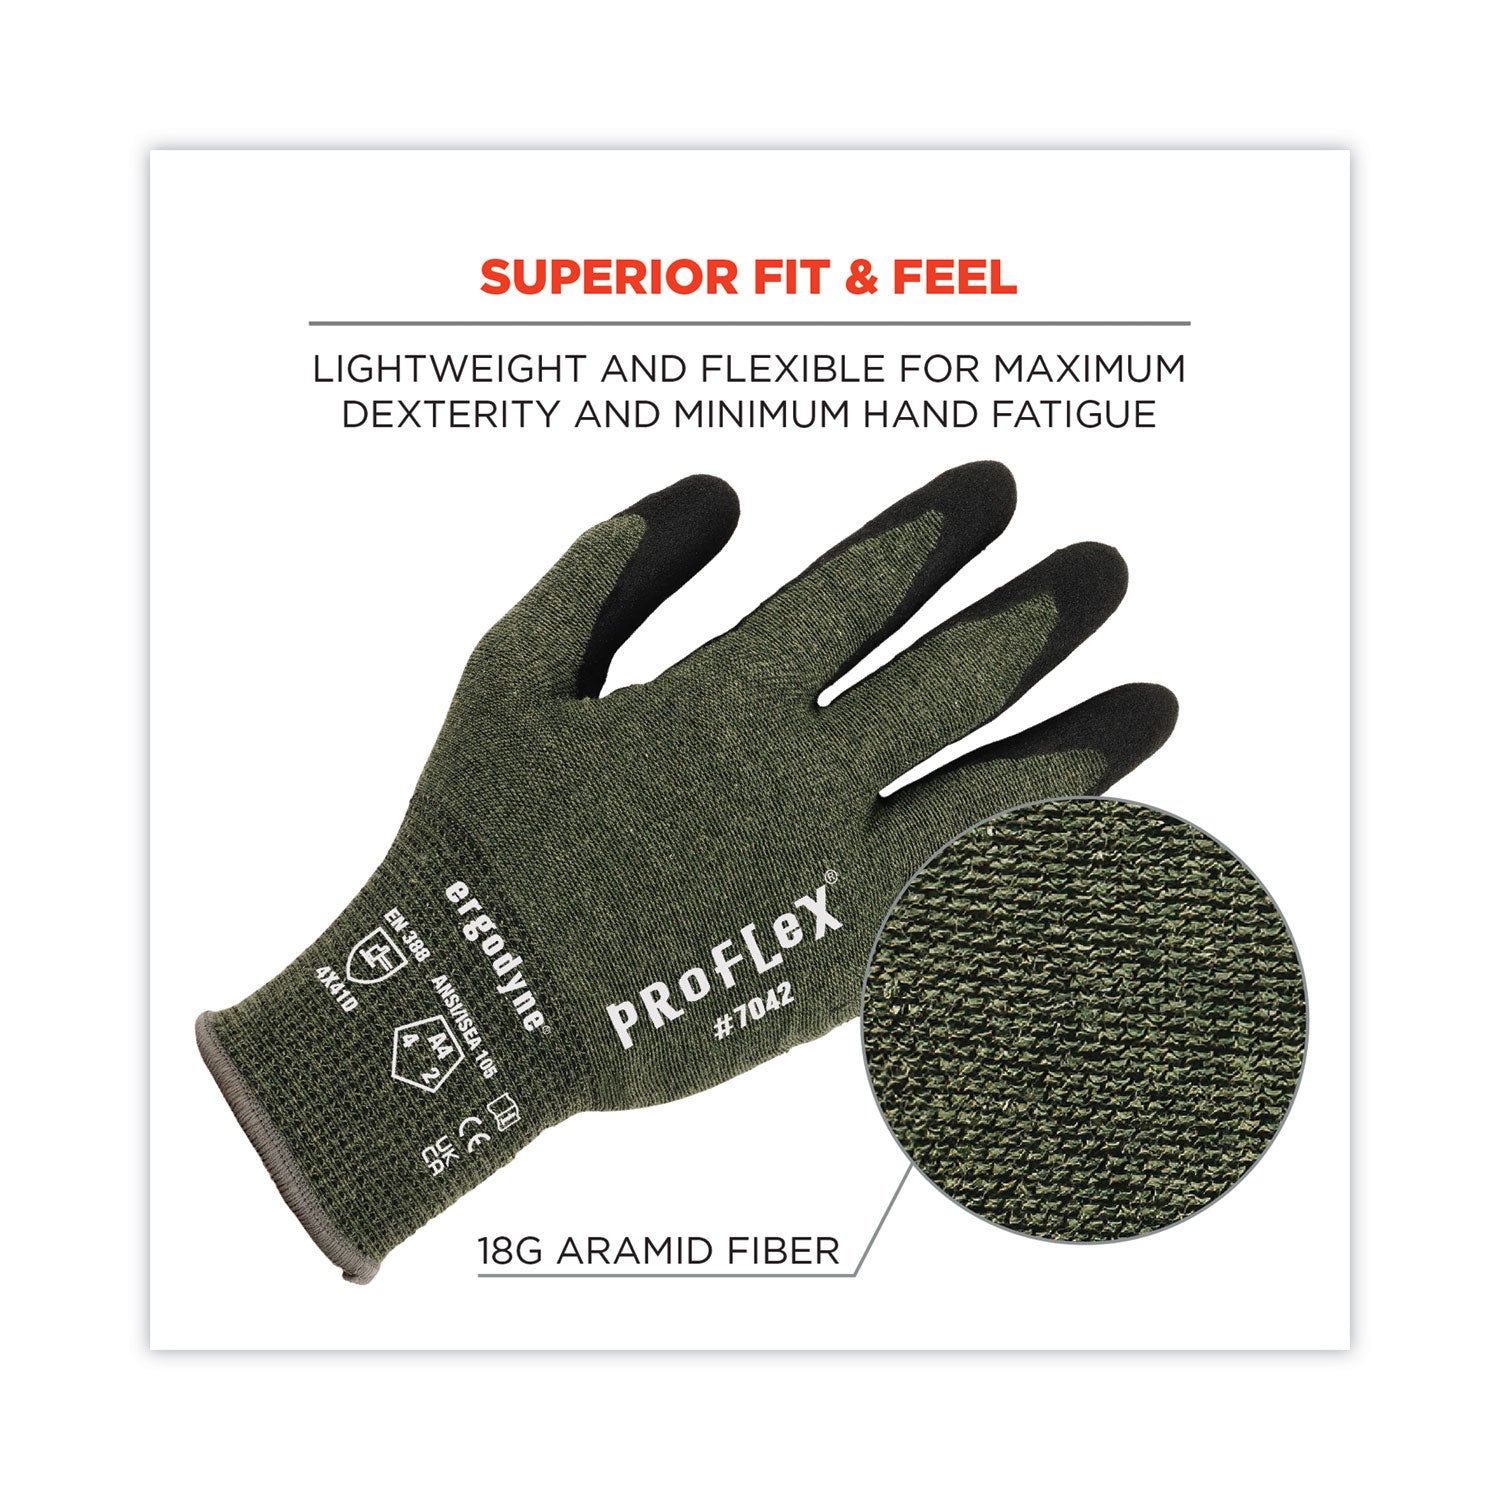 proflex-7042-ansi-a4-nitrile-coated-cr-gloves-green-medium-12-pairs-pack-ships-in-1-3-business-days_ego10333 - 2